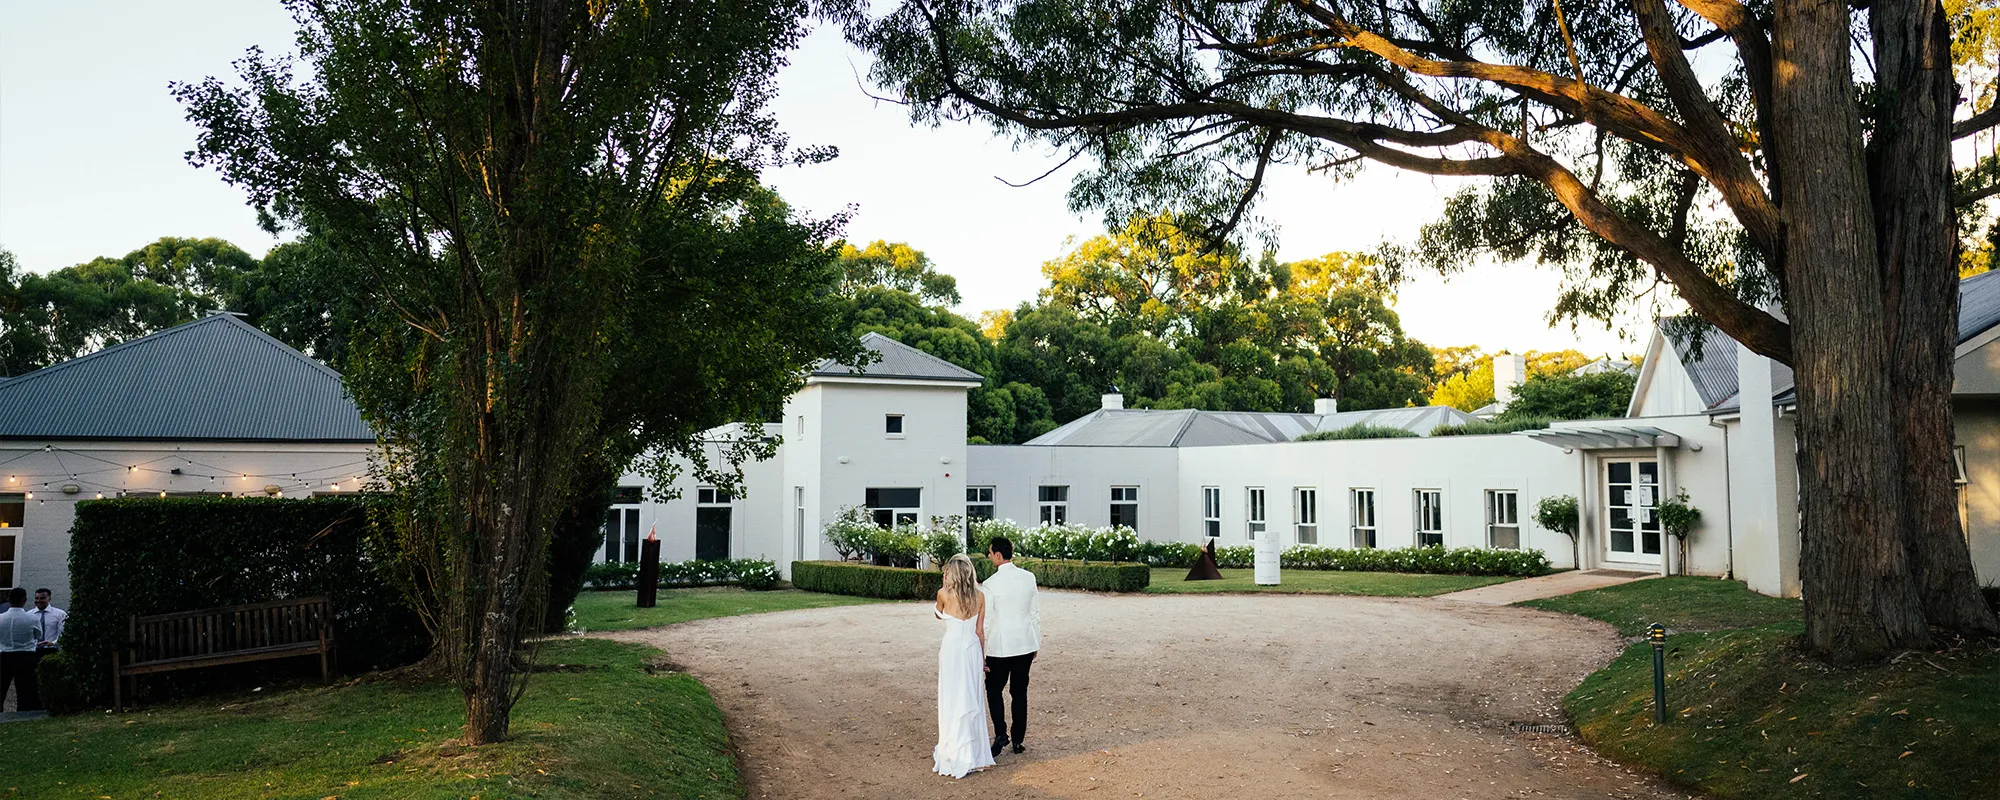 Lancemore Lindenderry Red Hill Boutique Luxury Accommodation Melbourne Wedding Venue Ceremony Motta Weddings 2000 x 800 6